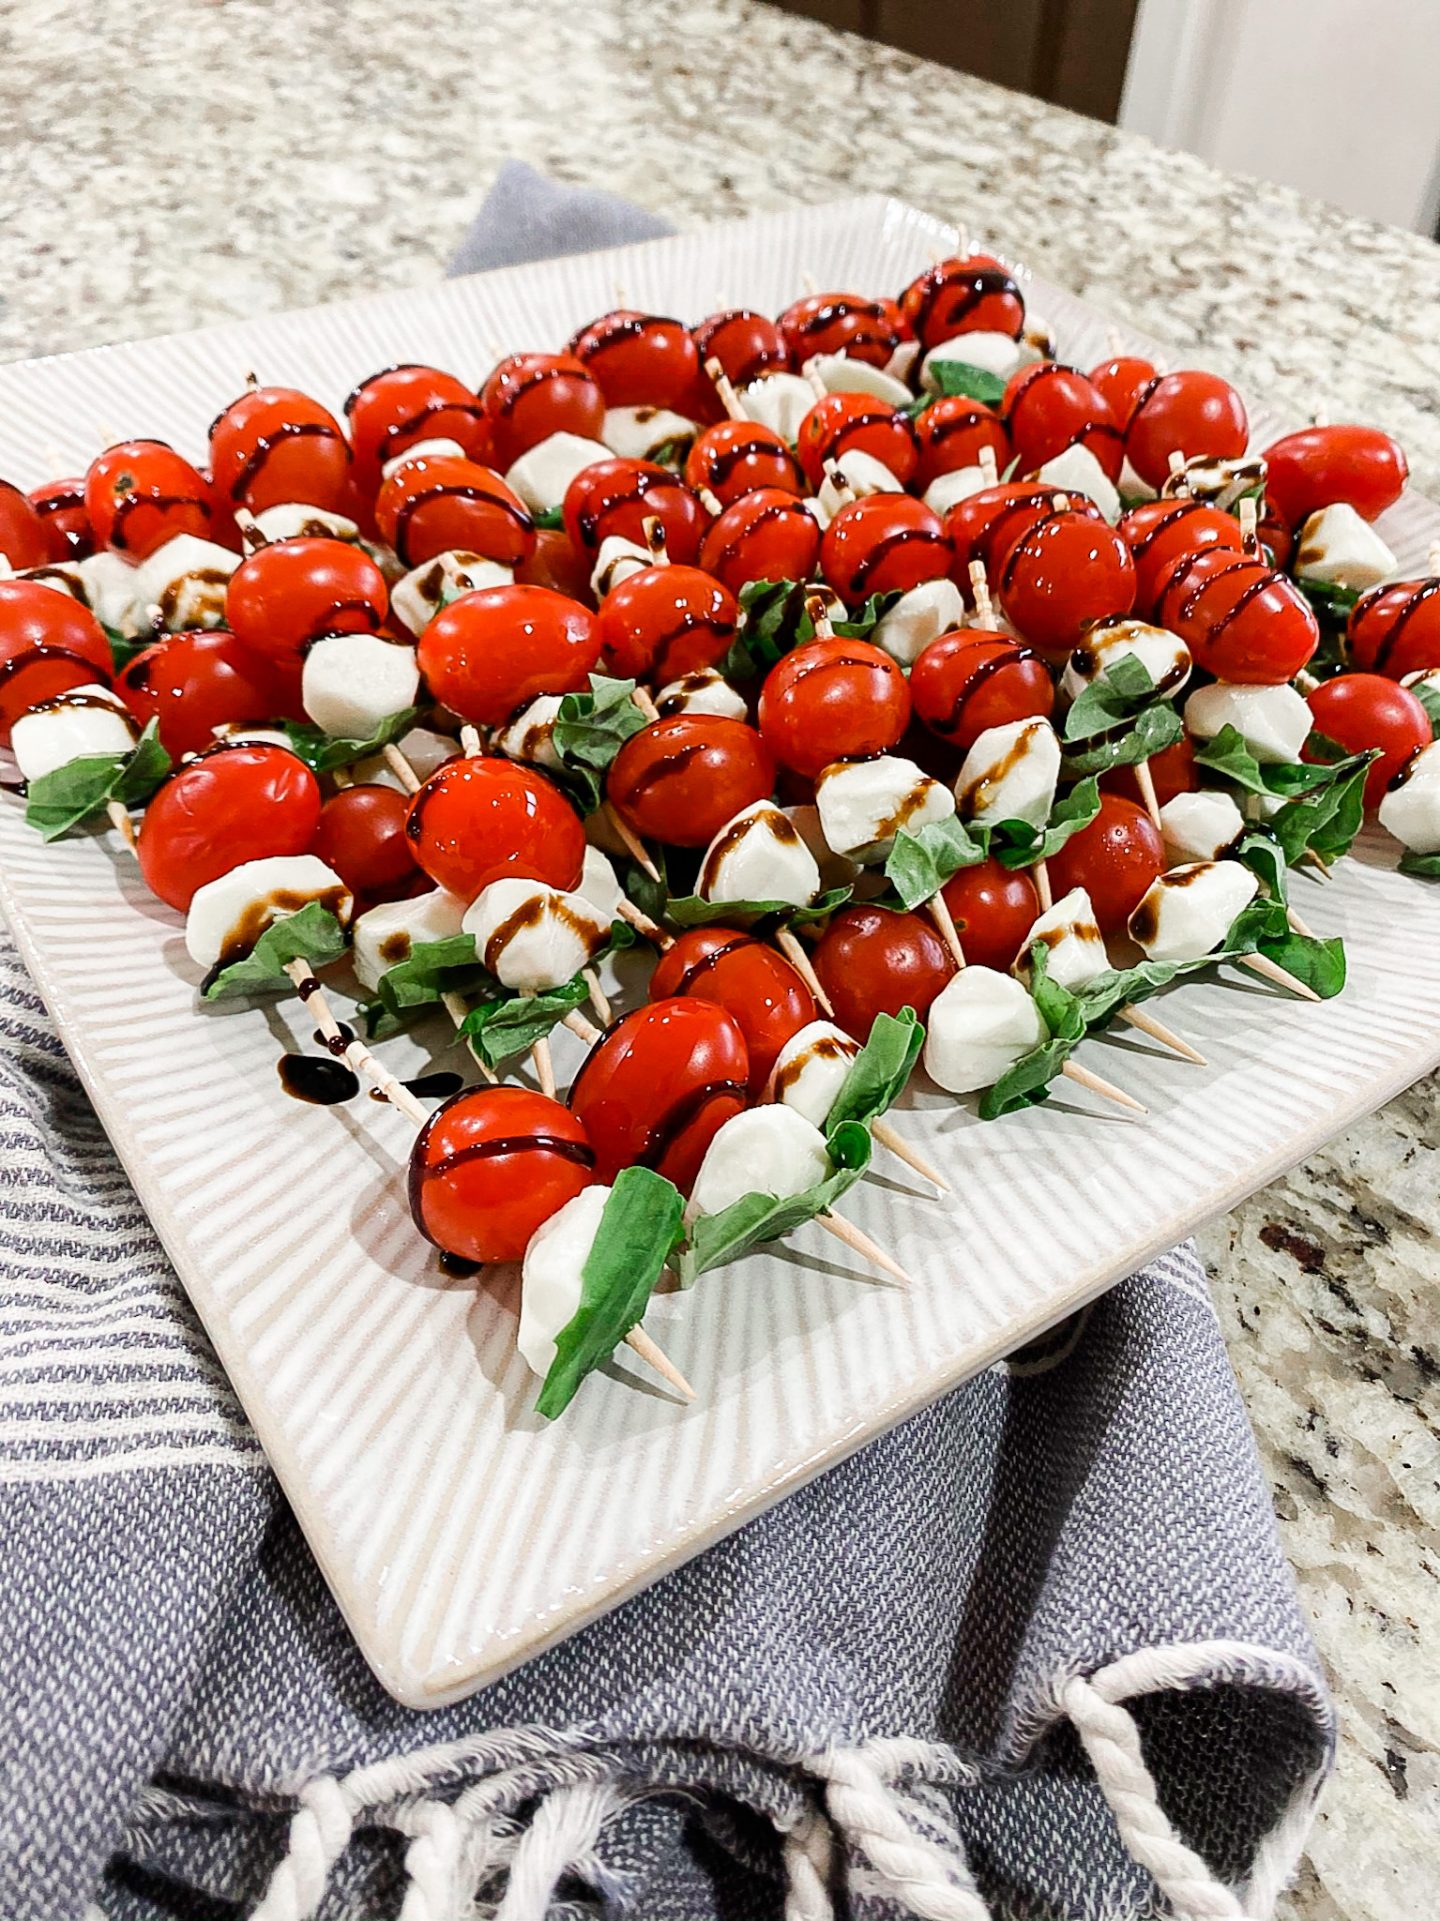 Appetizers: Easy And Quick Caprese Salad Skewers Recipe by Alabama Food + Lifestyle blogger, Heather Brown // My Life Well Loved